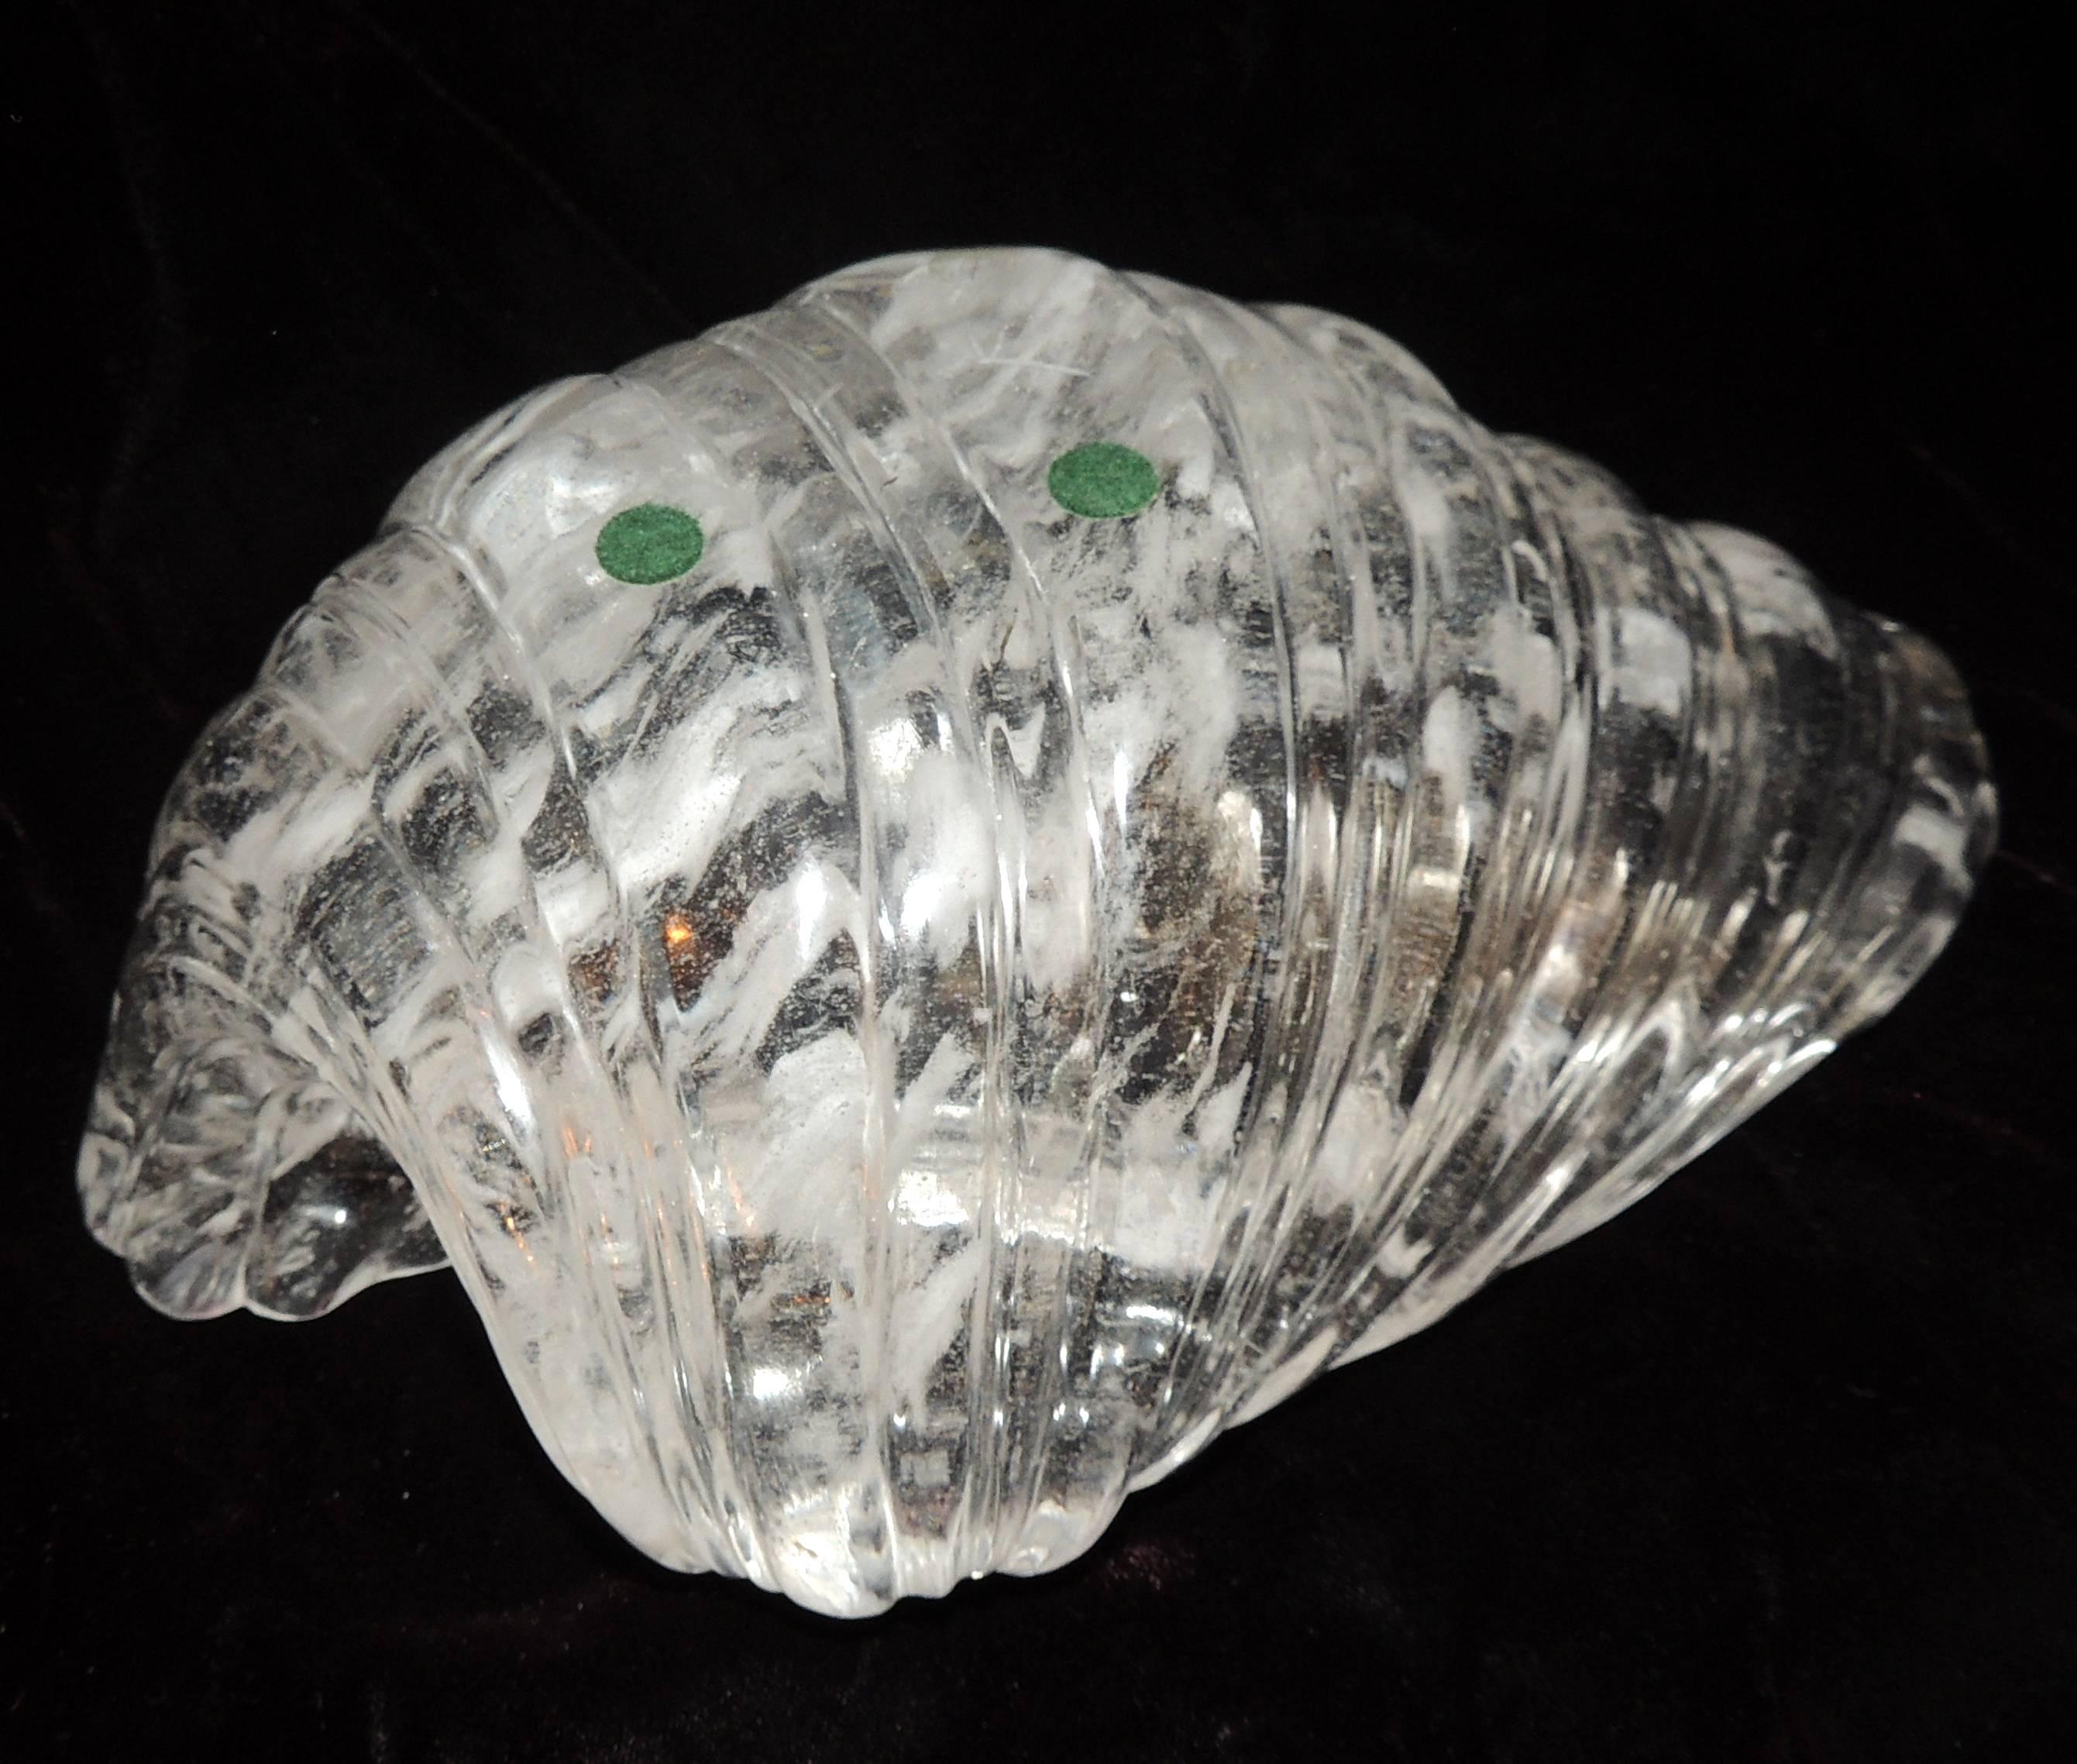 20th Century Wonderful Carved/Cut Rock Crystal Sea Shell Form Sculpture Bowl Centerpiece